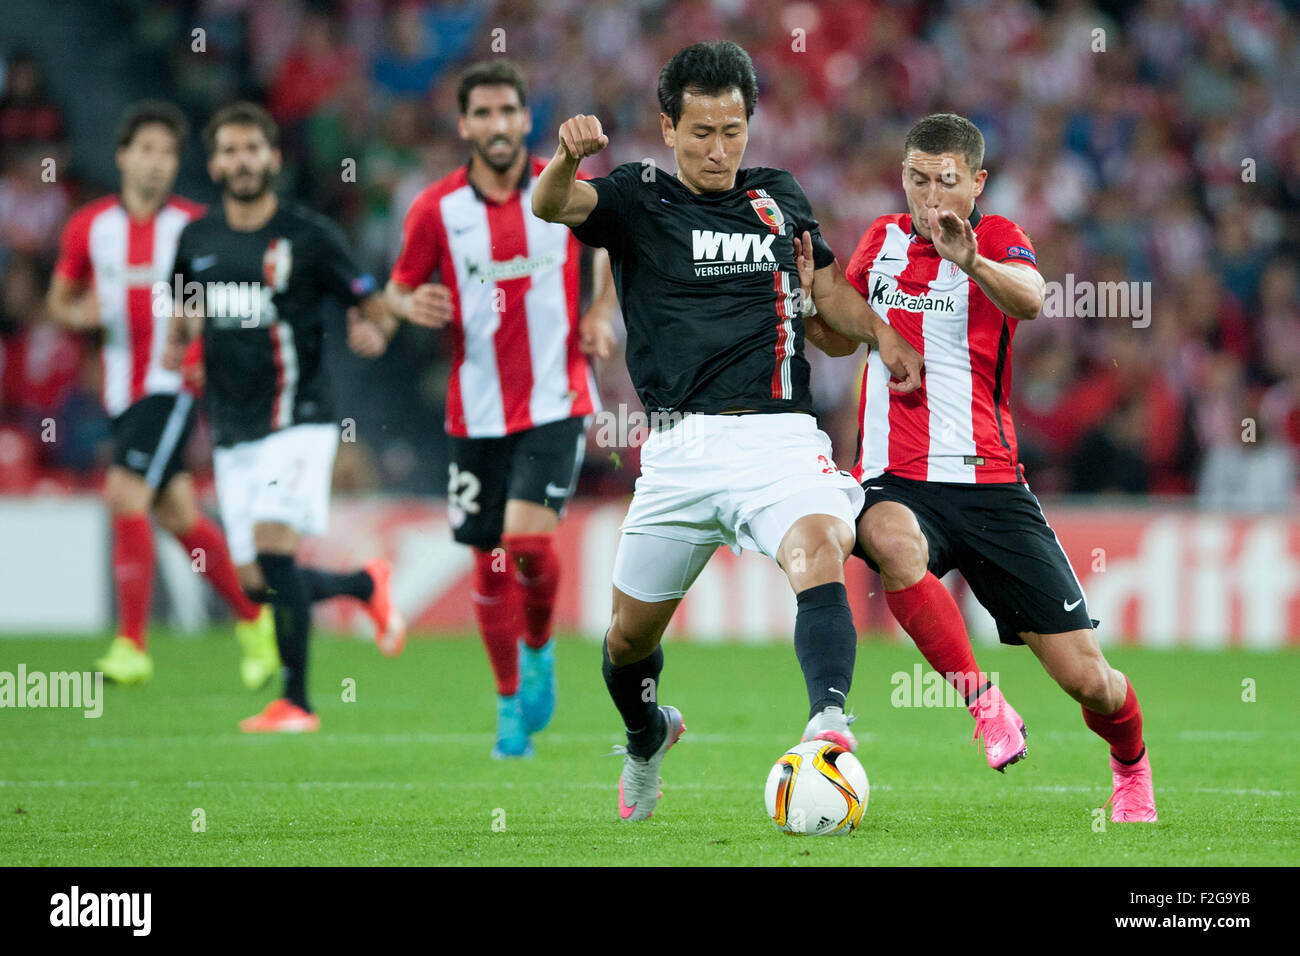 Bilbao, Spain. 17th Sep, 2015. Ji Dong-Won (L) of Augsburg and Oscar De Marcos of Bilbao vie for the ball during the UEFA Europa League Group L soccer match between Athletic Bilbao and FC Augsburg at Estadio de San Mames in Bilbao, Spain, 17 September 2015. Photo: Juan Flor/dpa/Alamy Live News Stock Photo